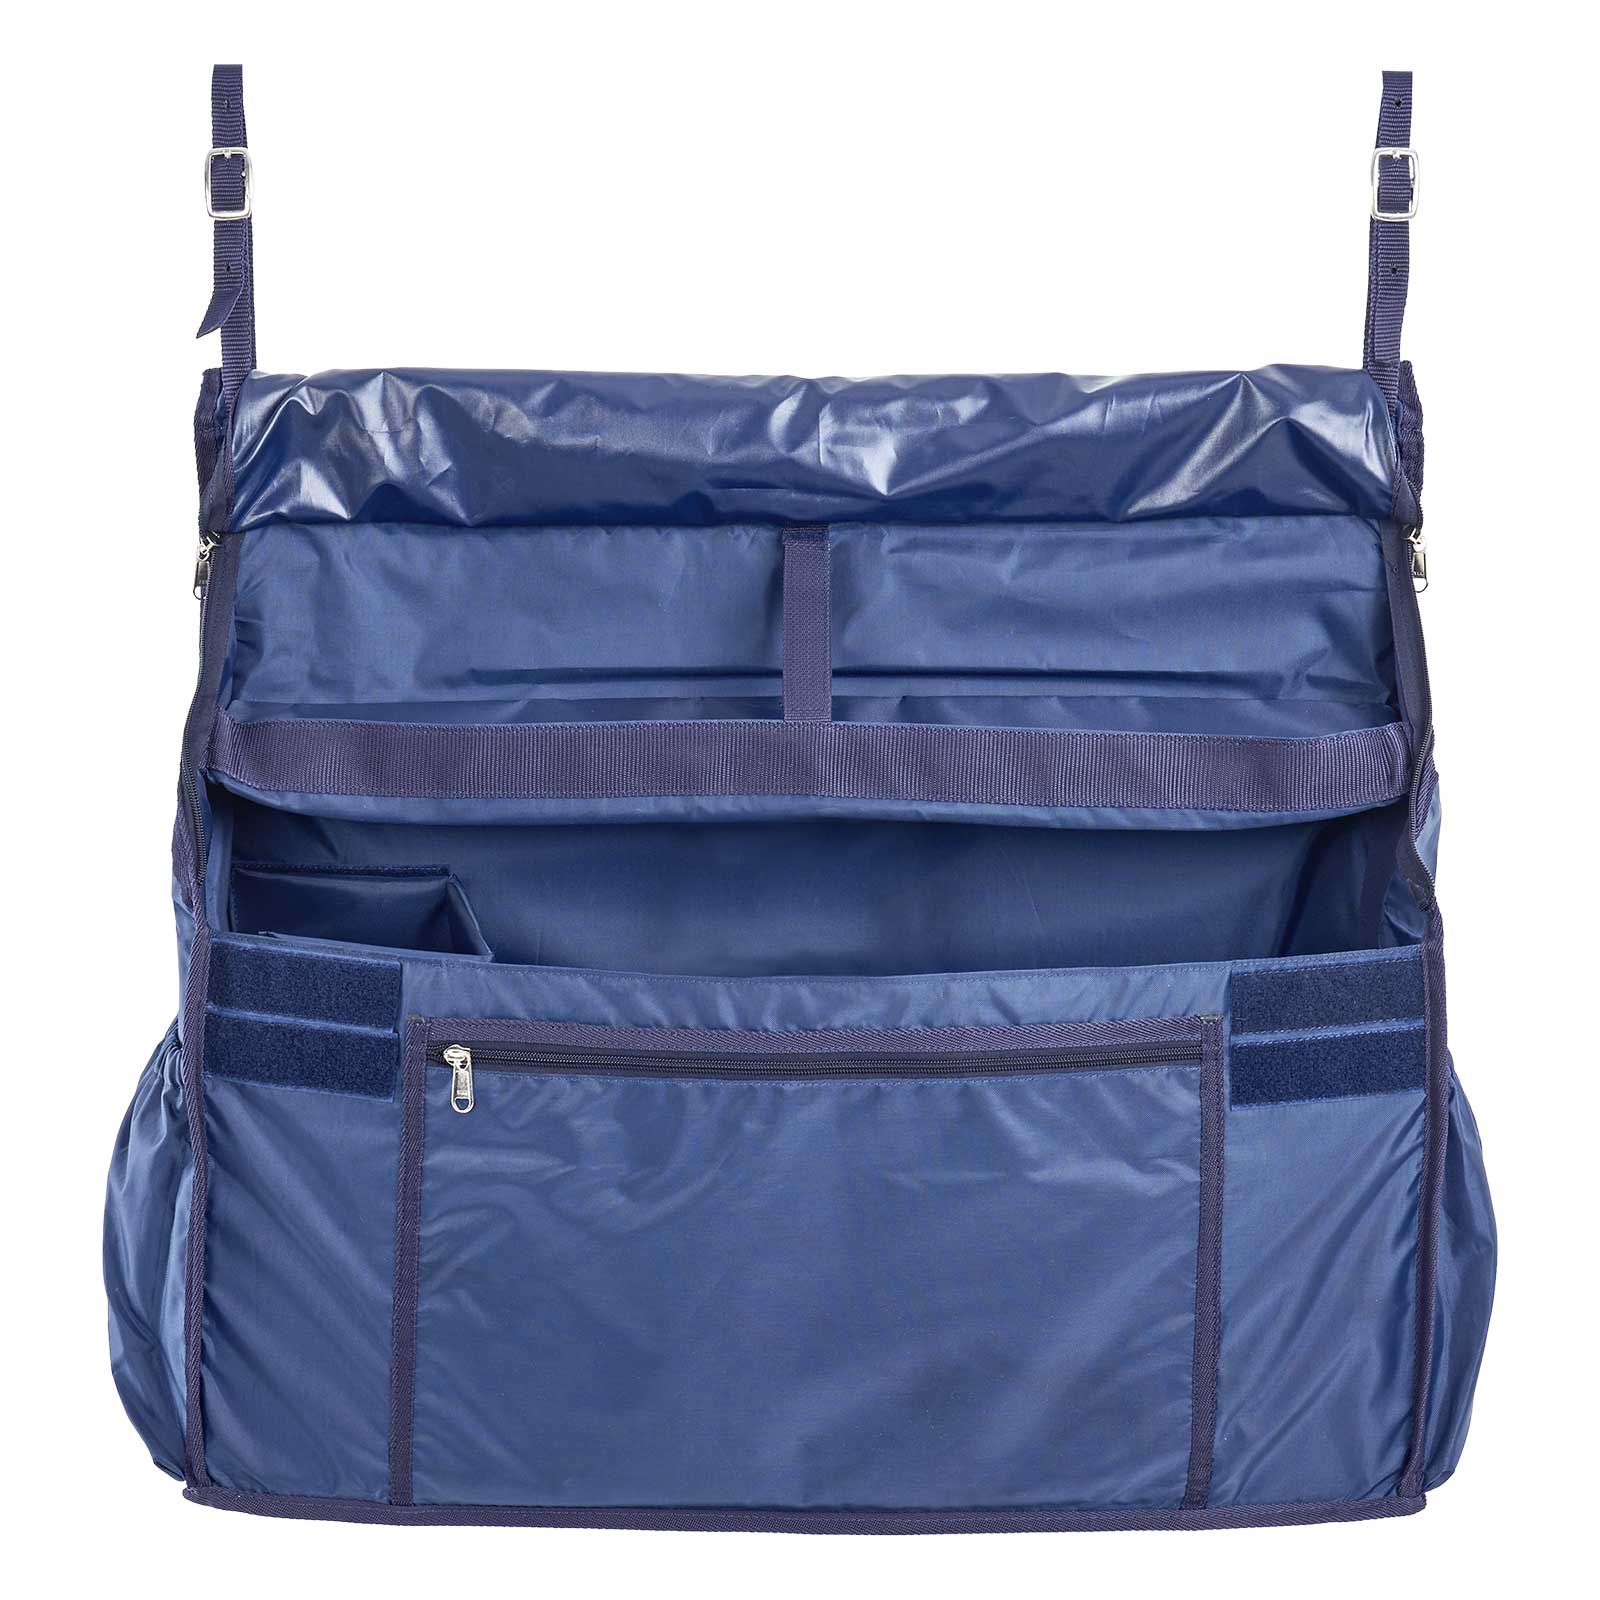 Busse Stable Bag Rio